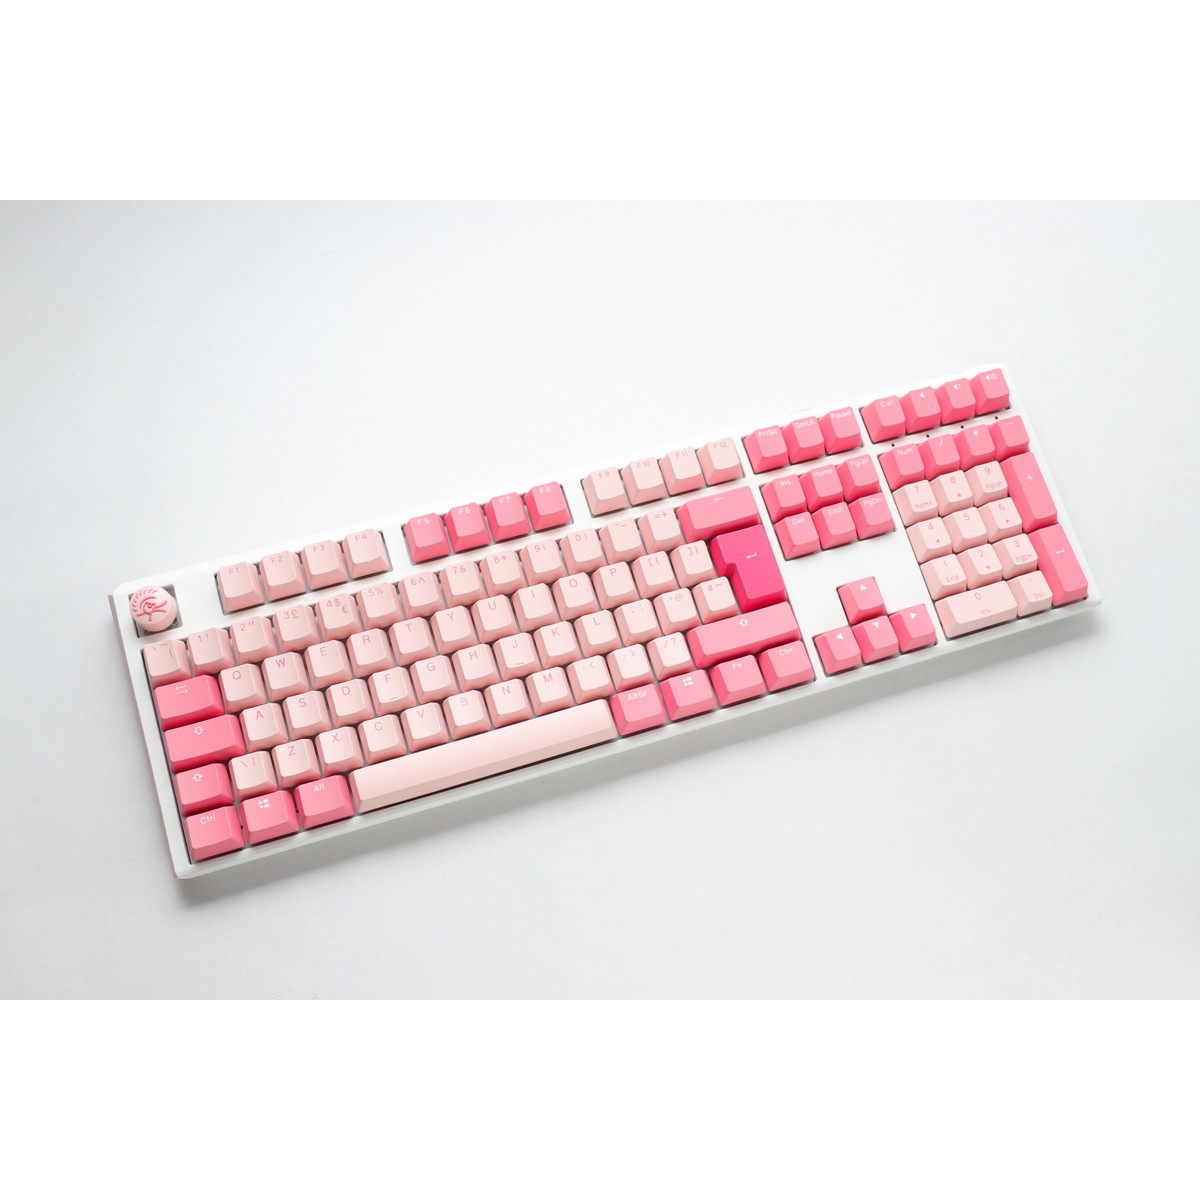 Ducky - Ducky One 3 Gossamer Pink USB Cherry MX Red Mechanical Gaming Keyboard UK Layout